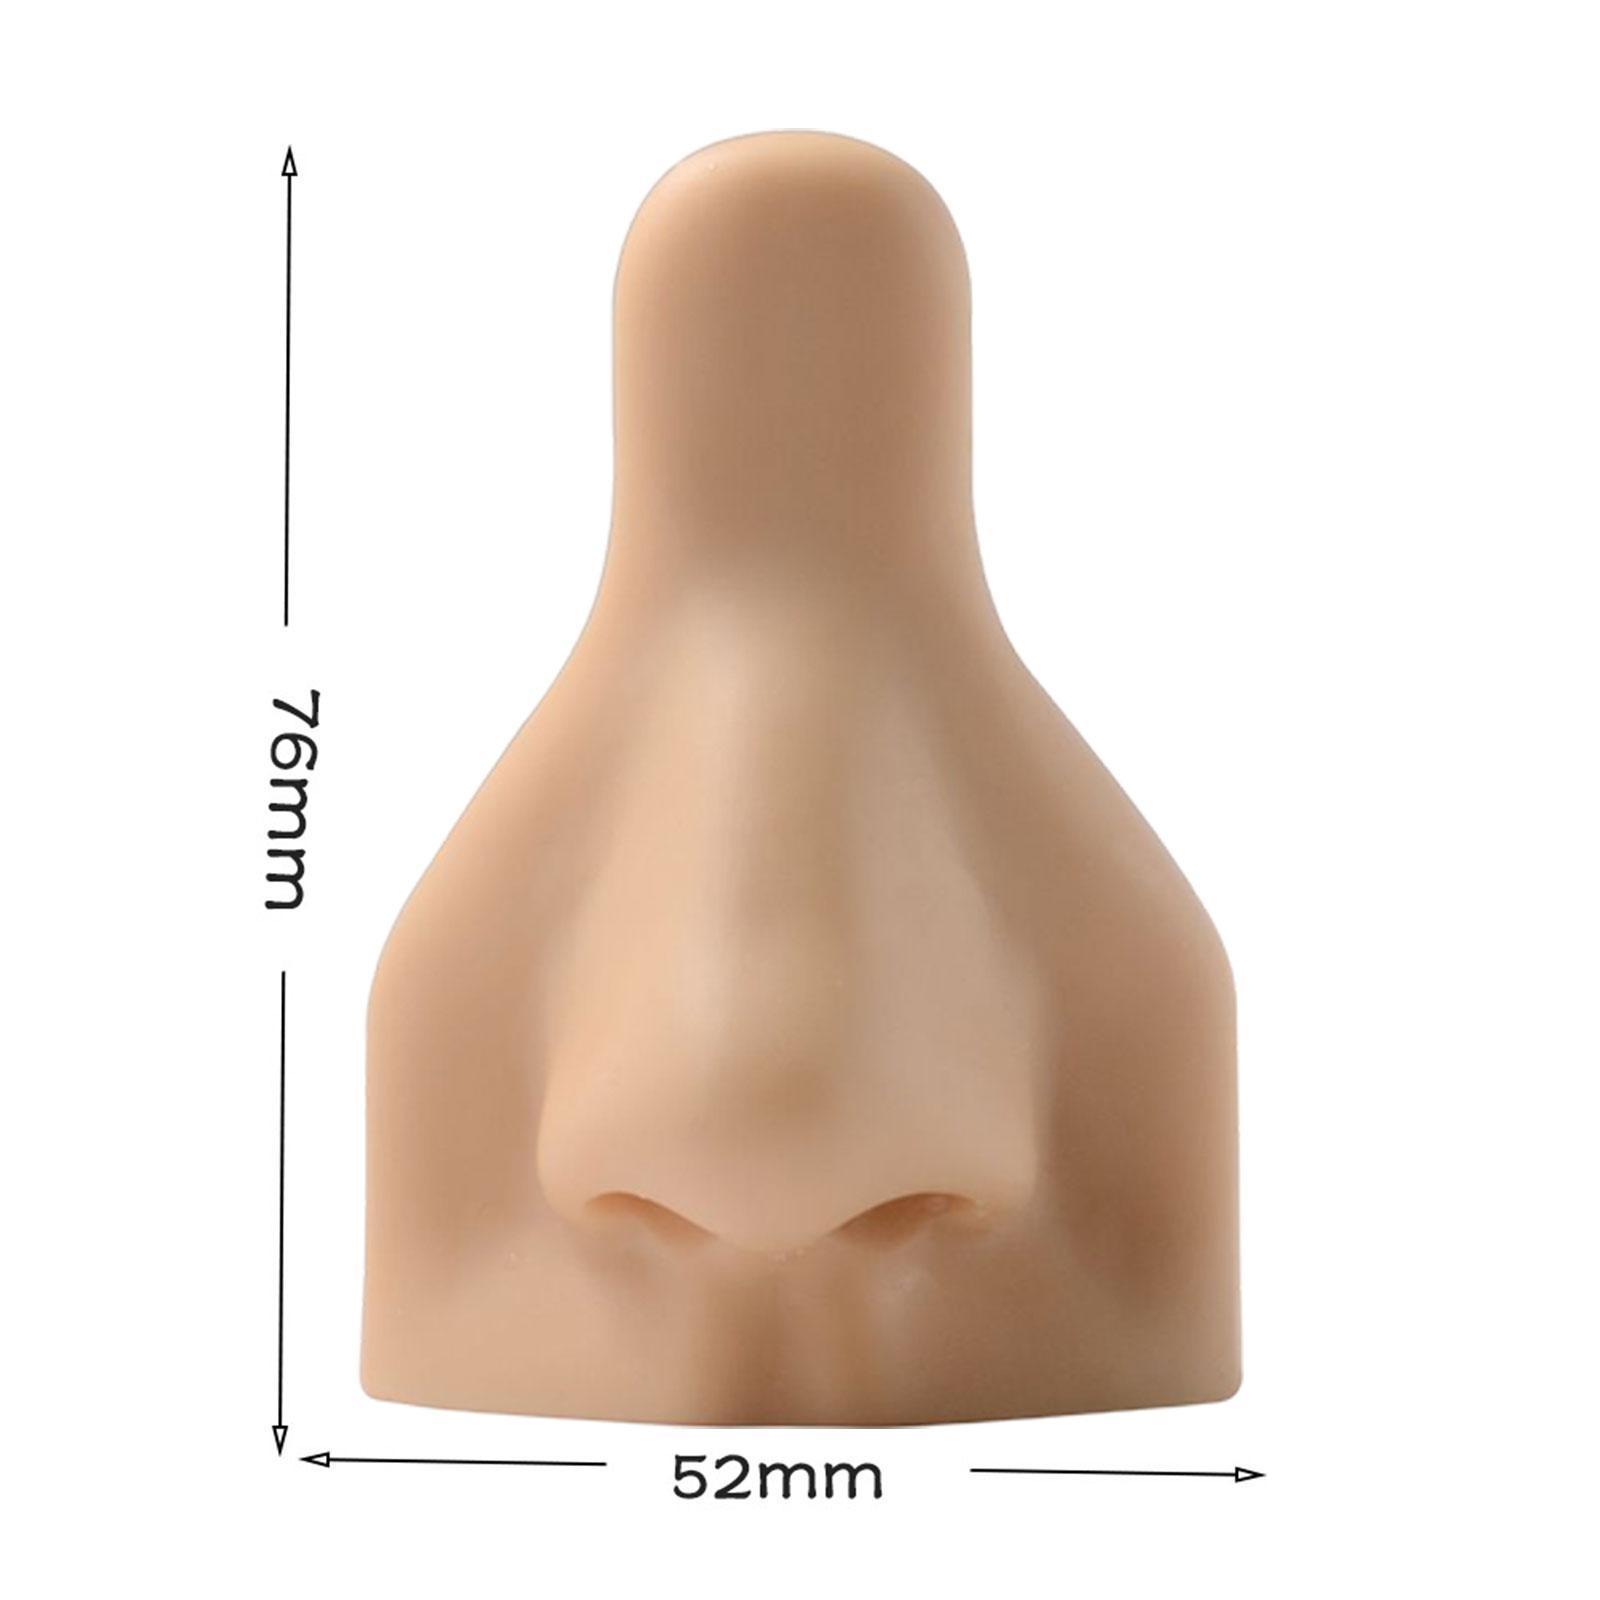 Soft Silicone Nose Model Simulation Reusable Flexible for Piercing Practice